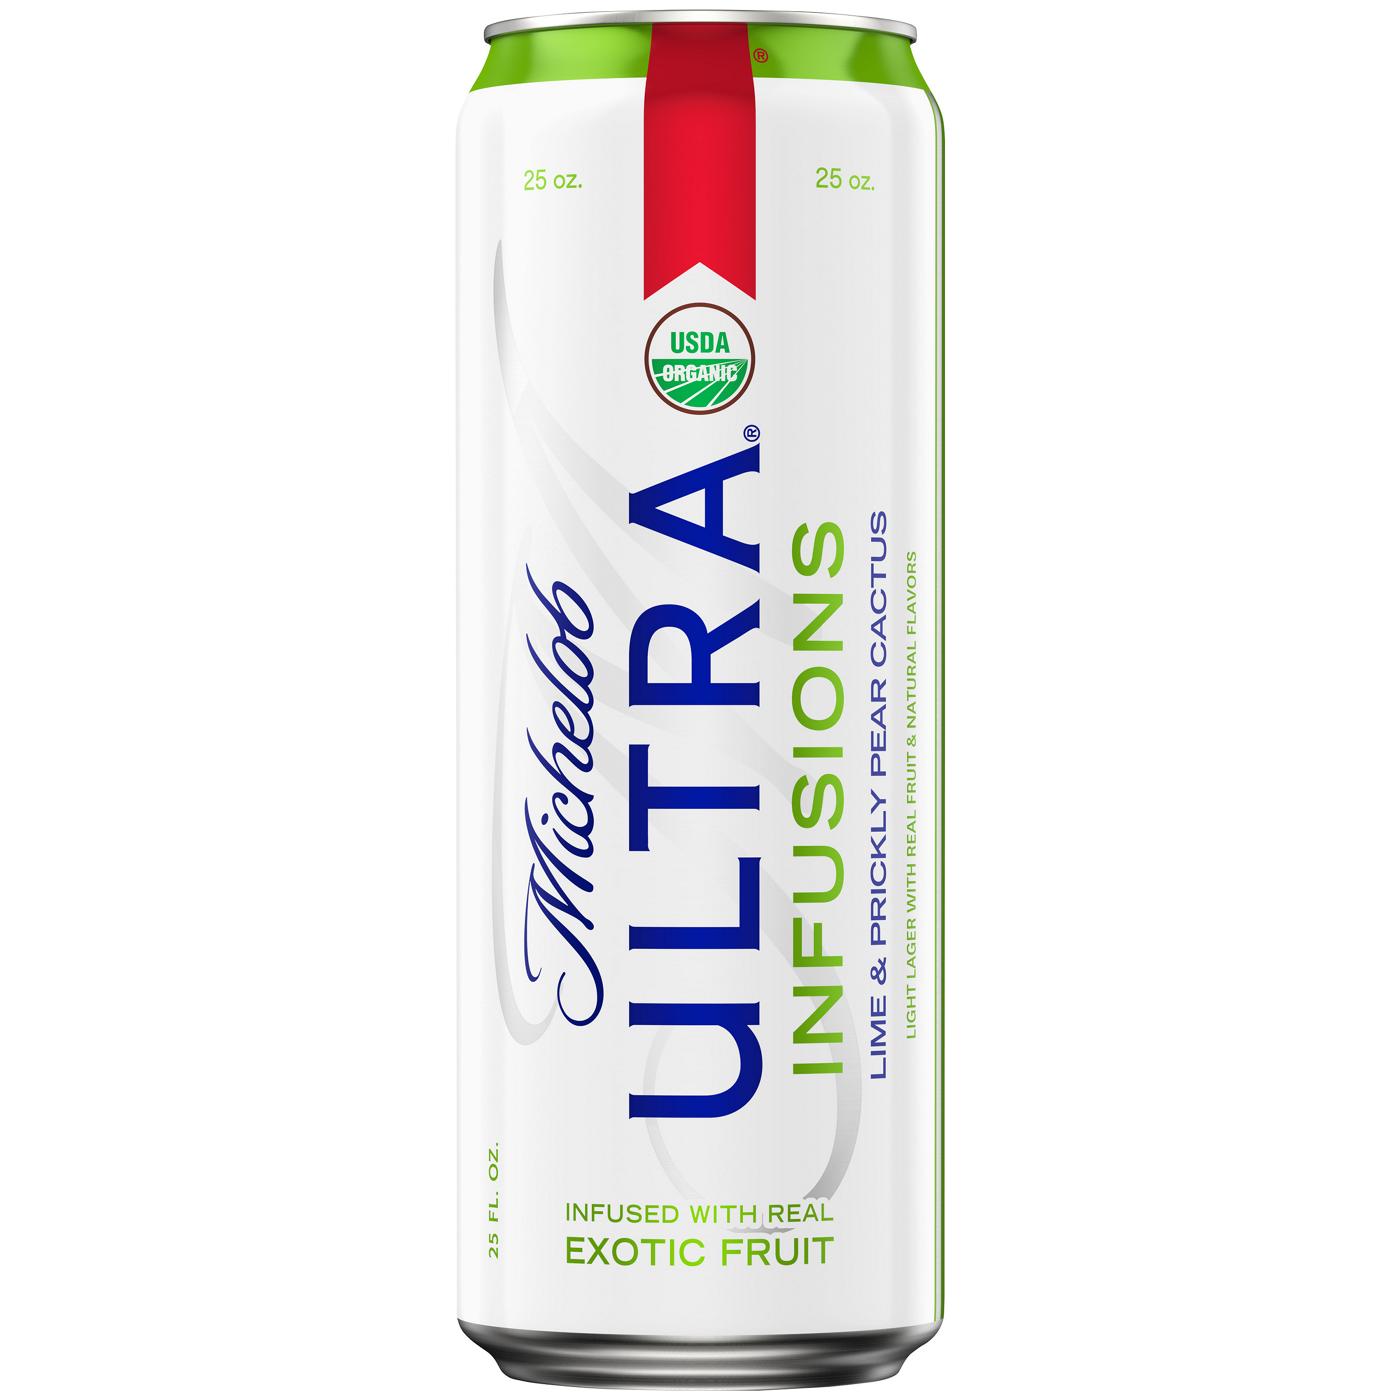 Michelob Ultra Infusions Lime & Prickly Pear Cactus Light Lager Beer; image 1 of 2